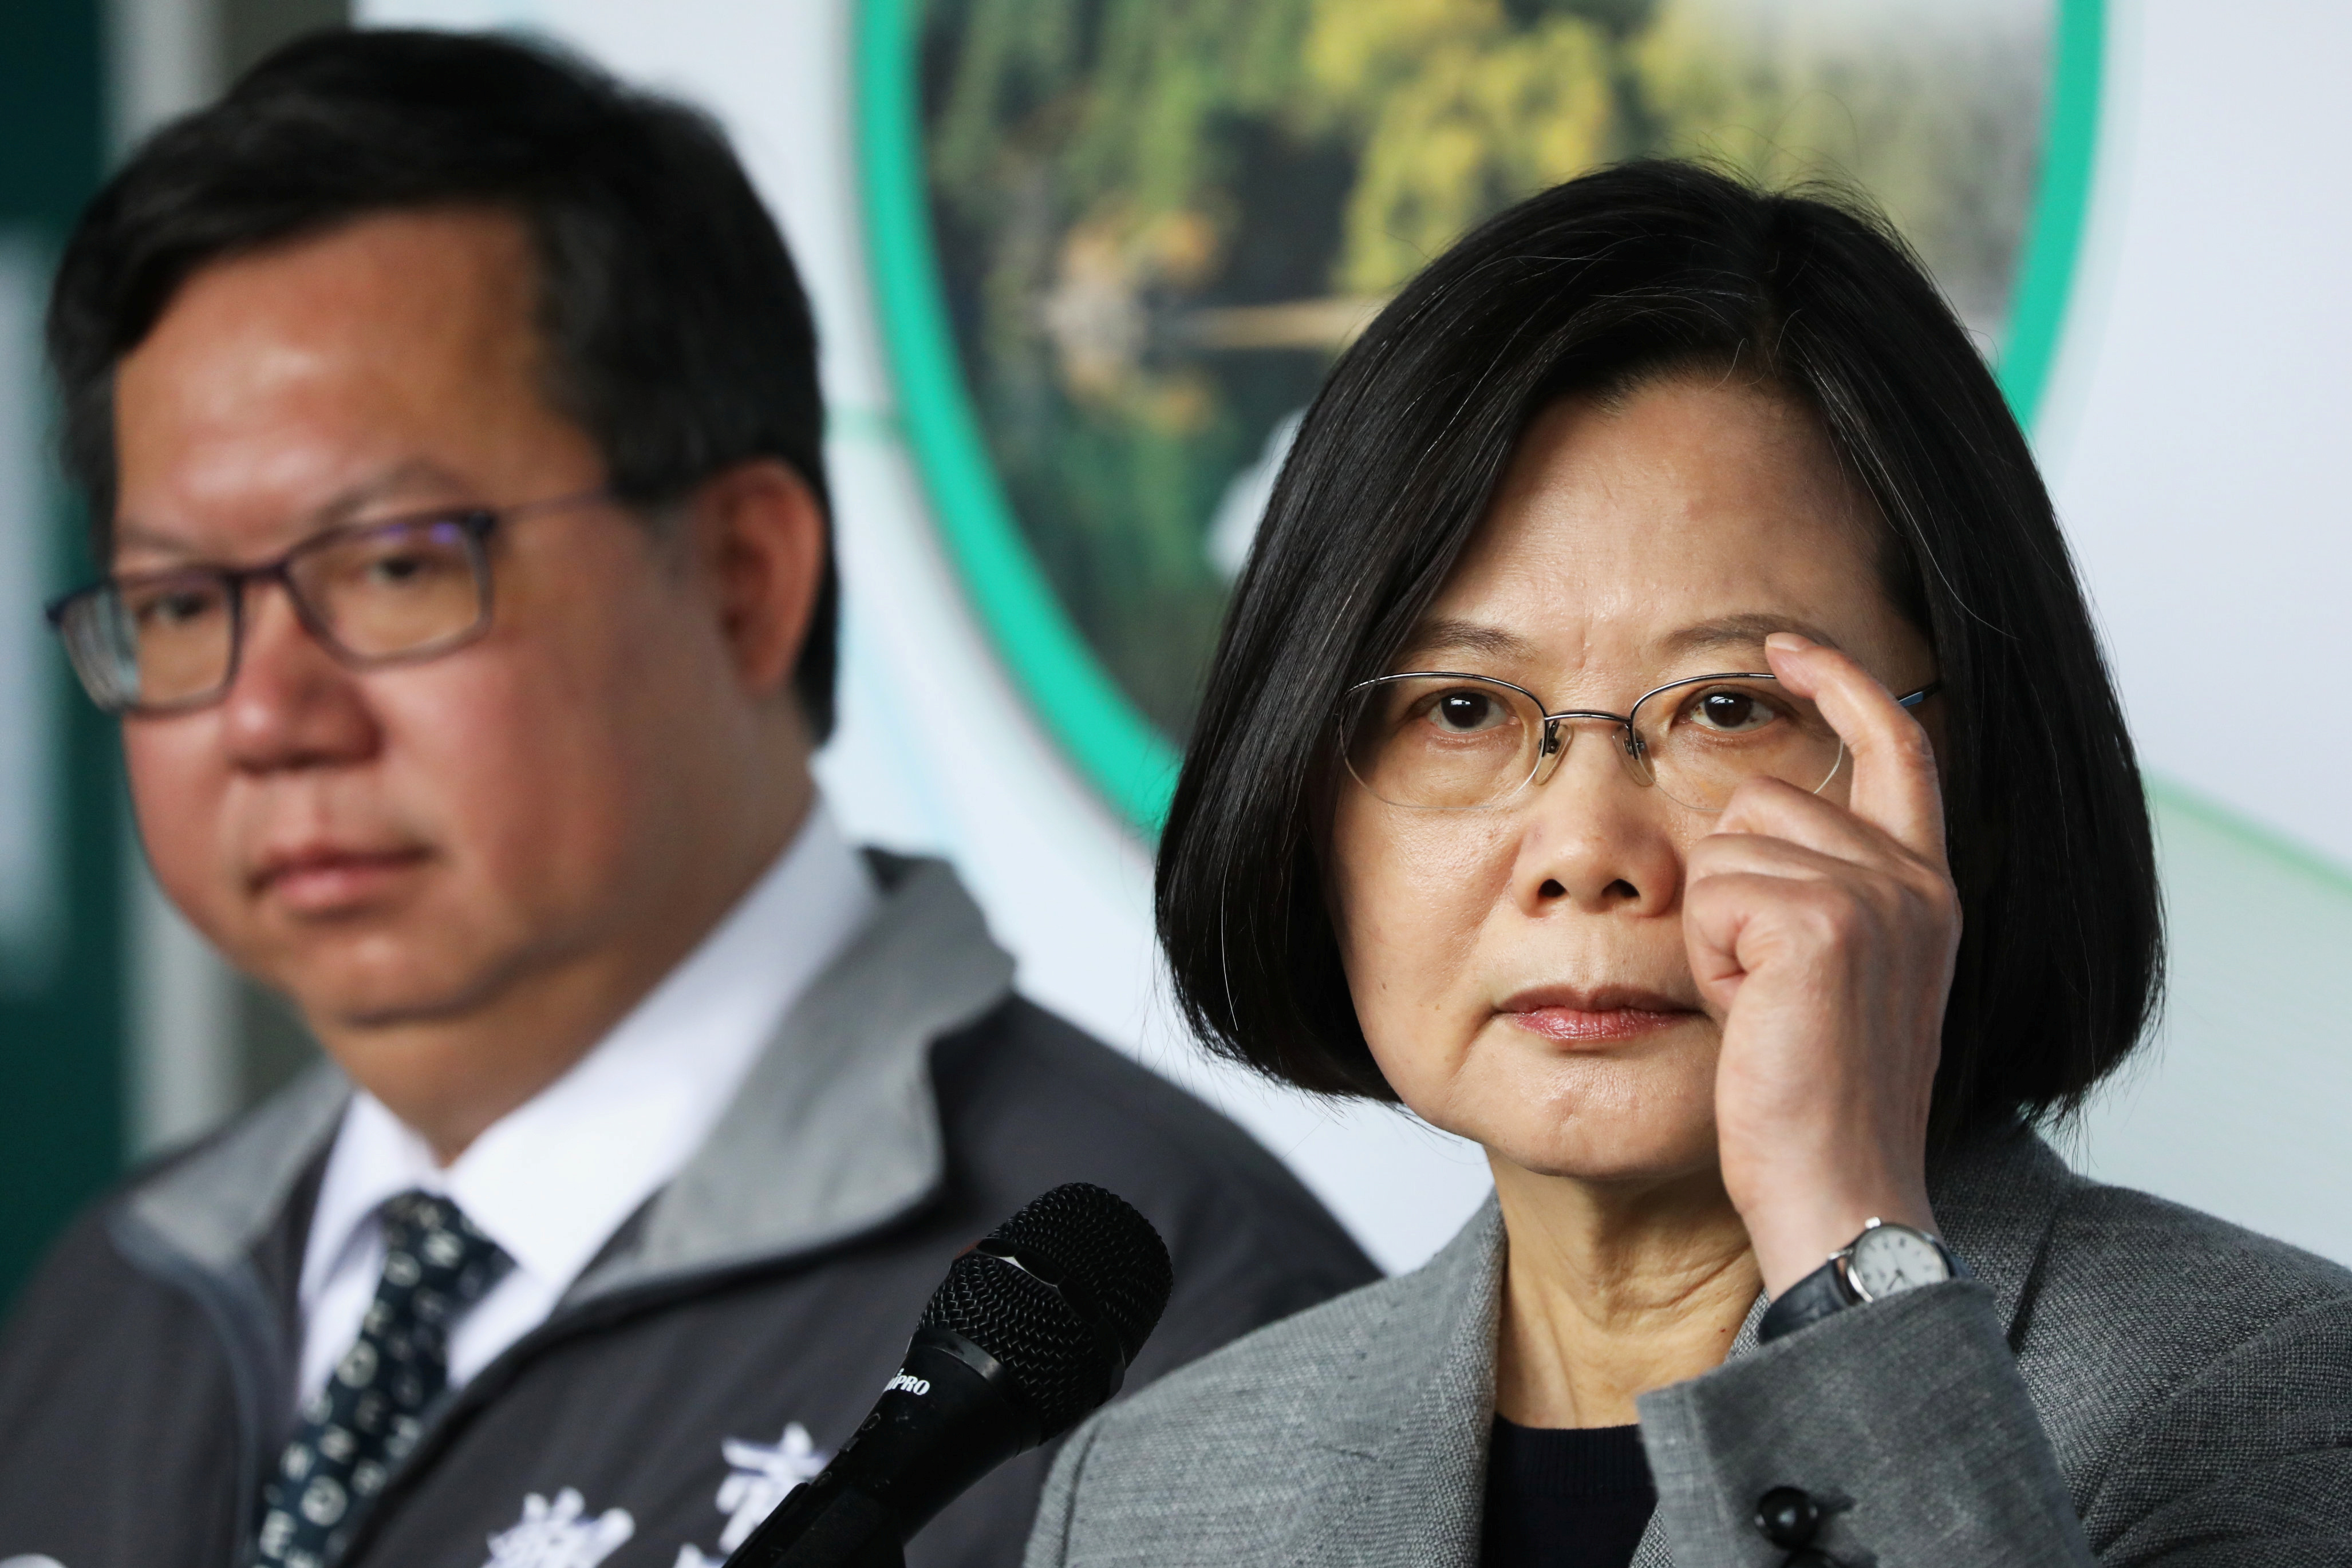 Taiwan's Tsai Ing-wen enters second term with a strong political mandate,  but no room for complacency